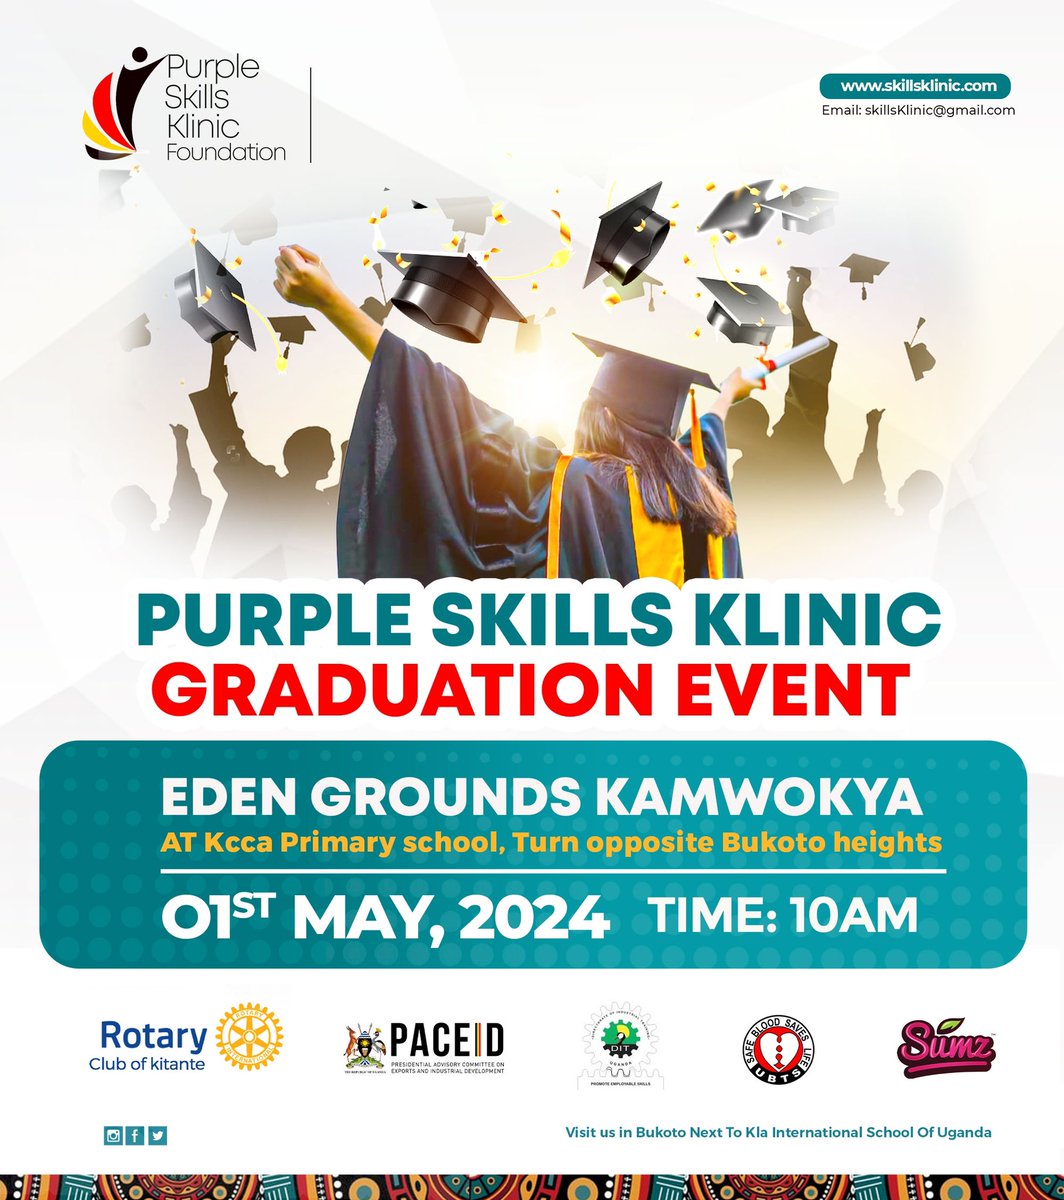 We chose to do our graduation in the community of Kamwokya itself wer we are based. 01-05-24 Next week Wednesday. Come celebrate with us our students milestone @SkillsKlinic